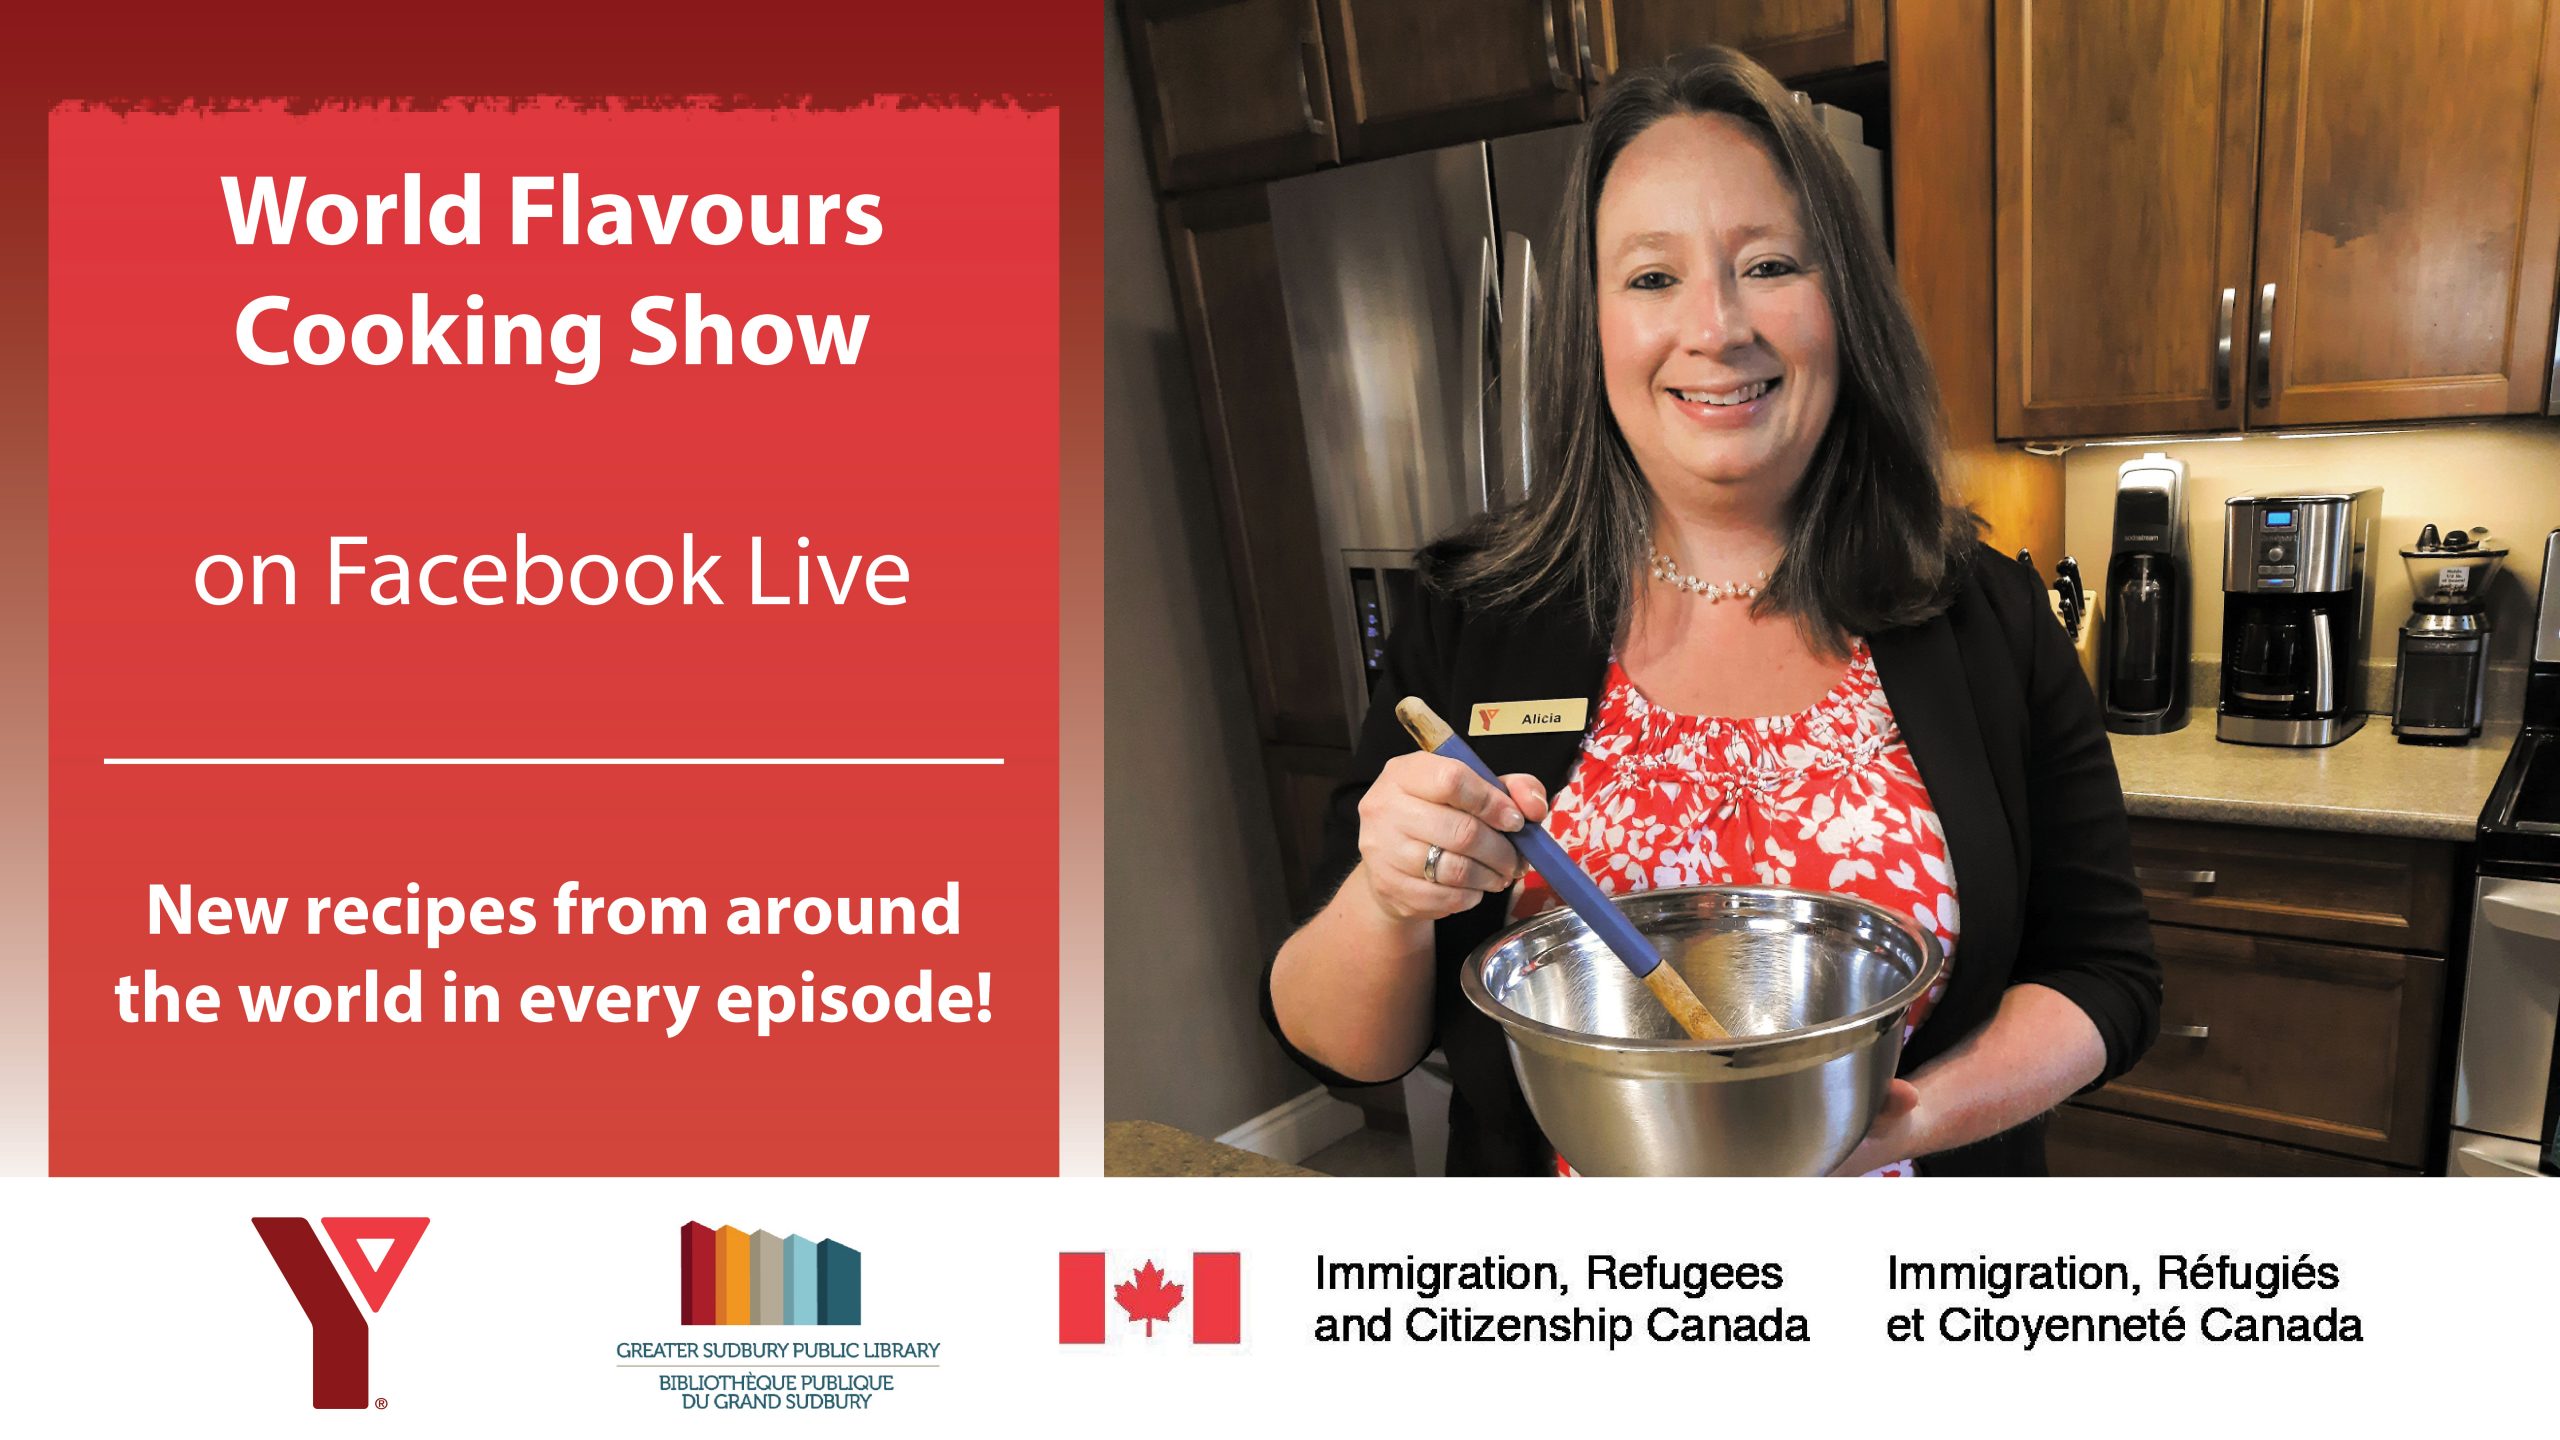 World Flavours Cooking Show